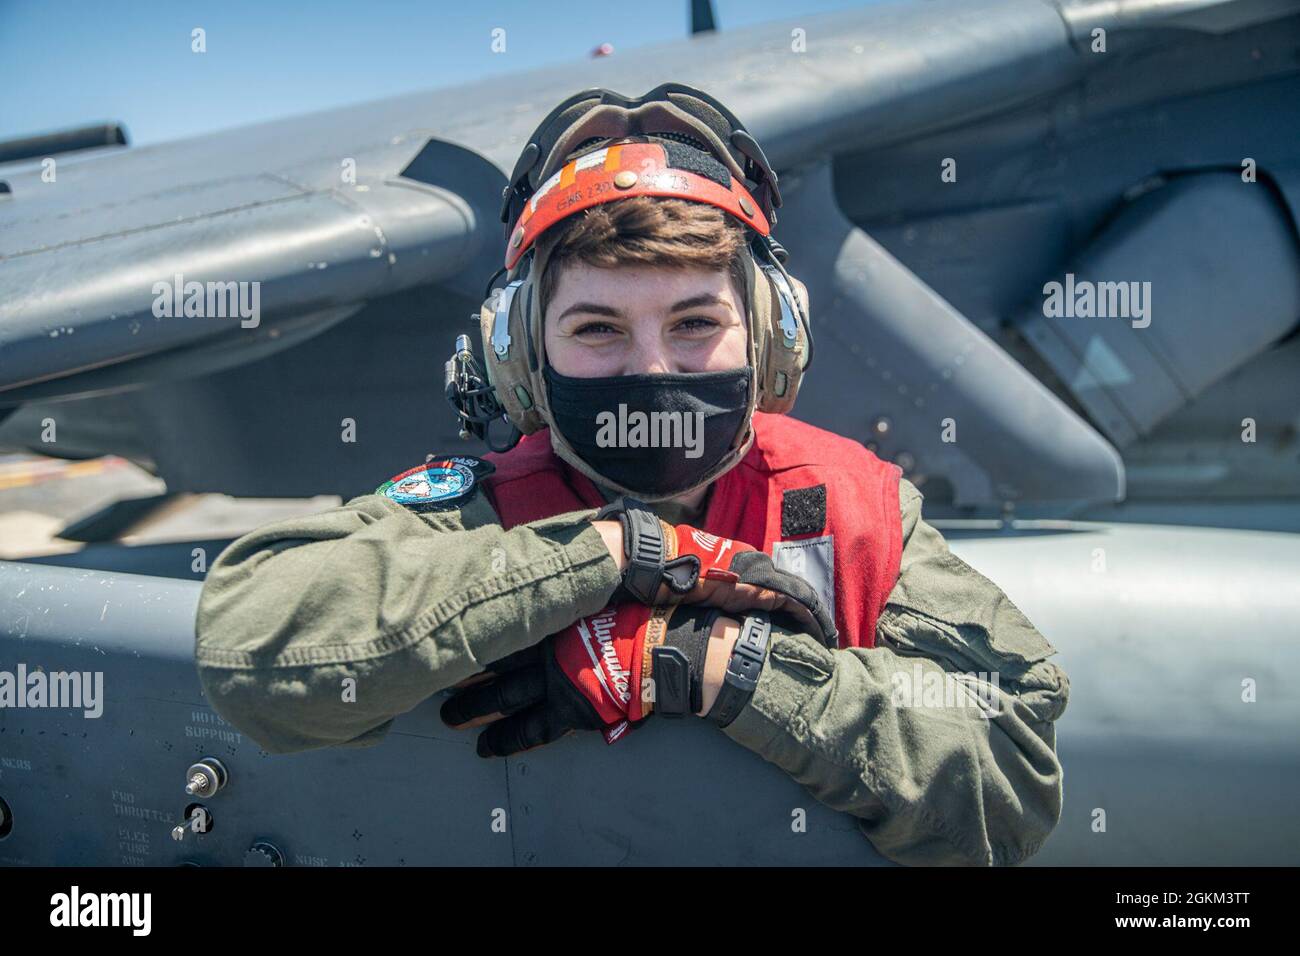 PACIFIC OCEAN (May 21, 2021) U.S. Marine Corps Cpl. Gigi Gruber, an ordnance quality assurance safety observer with Marine Attack Squadron (VMA) 214, 11th Marine Expeditionary Unit (MEU), poses for a photo with an AV-8B Harrier on the flight deck of amphibious assault ship USS Essex (LHD 2), May 21. Aside from equipping aircraft with munitions, Gruber’s responsibilities include inspecting aircraft and ordnance prior to takeoff to ensure that nothing will compromise the safety of the aircraft or pilot. Marines and Sailors of the 11th MEU and Essex Amphibious Ready Group (ARG) are underway condu Stock Photo